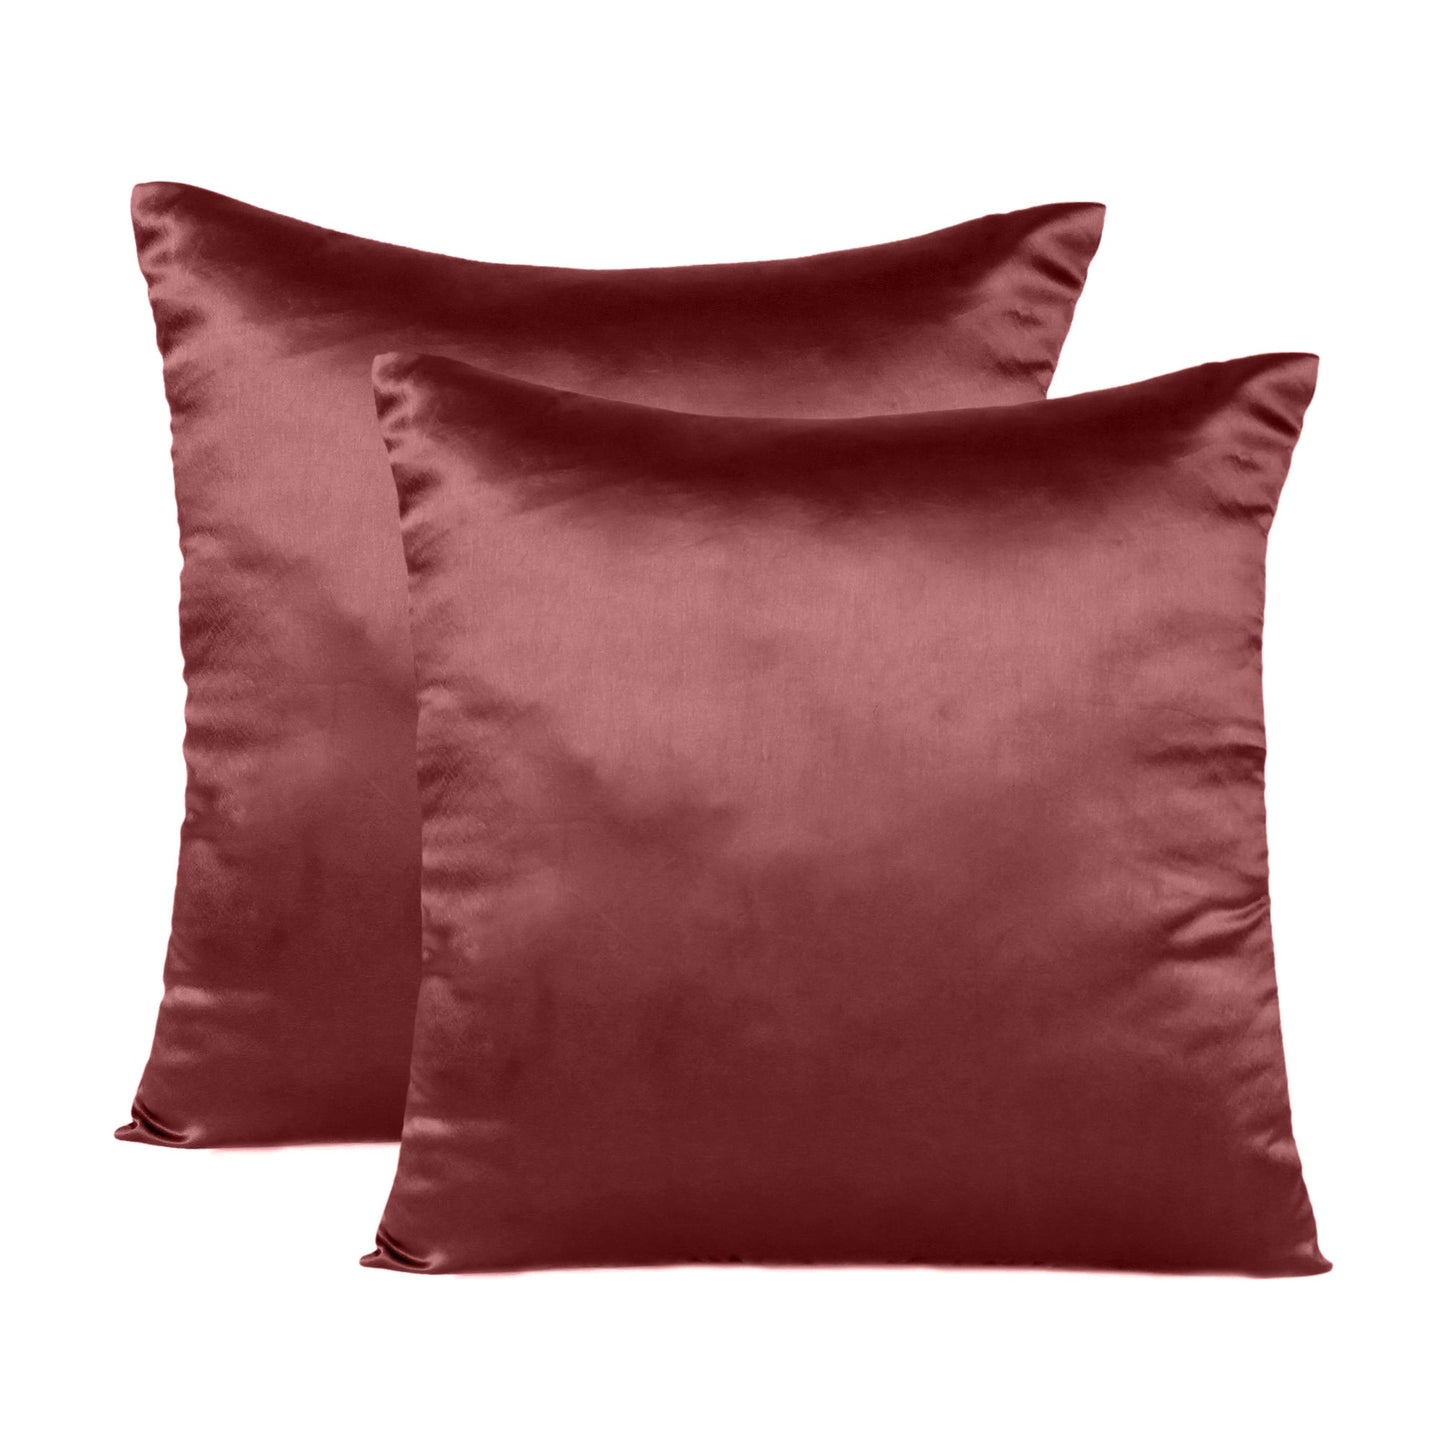 Jester Red Satin Silky Cushion Covers in Set of 2